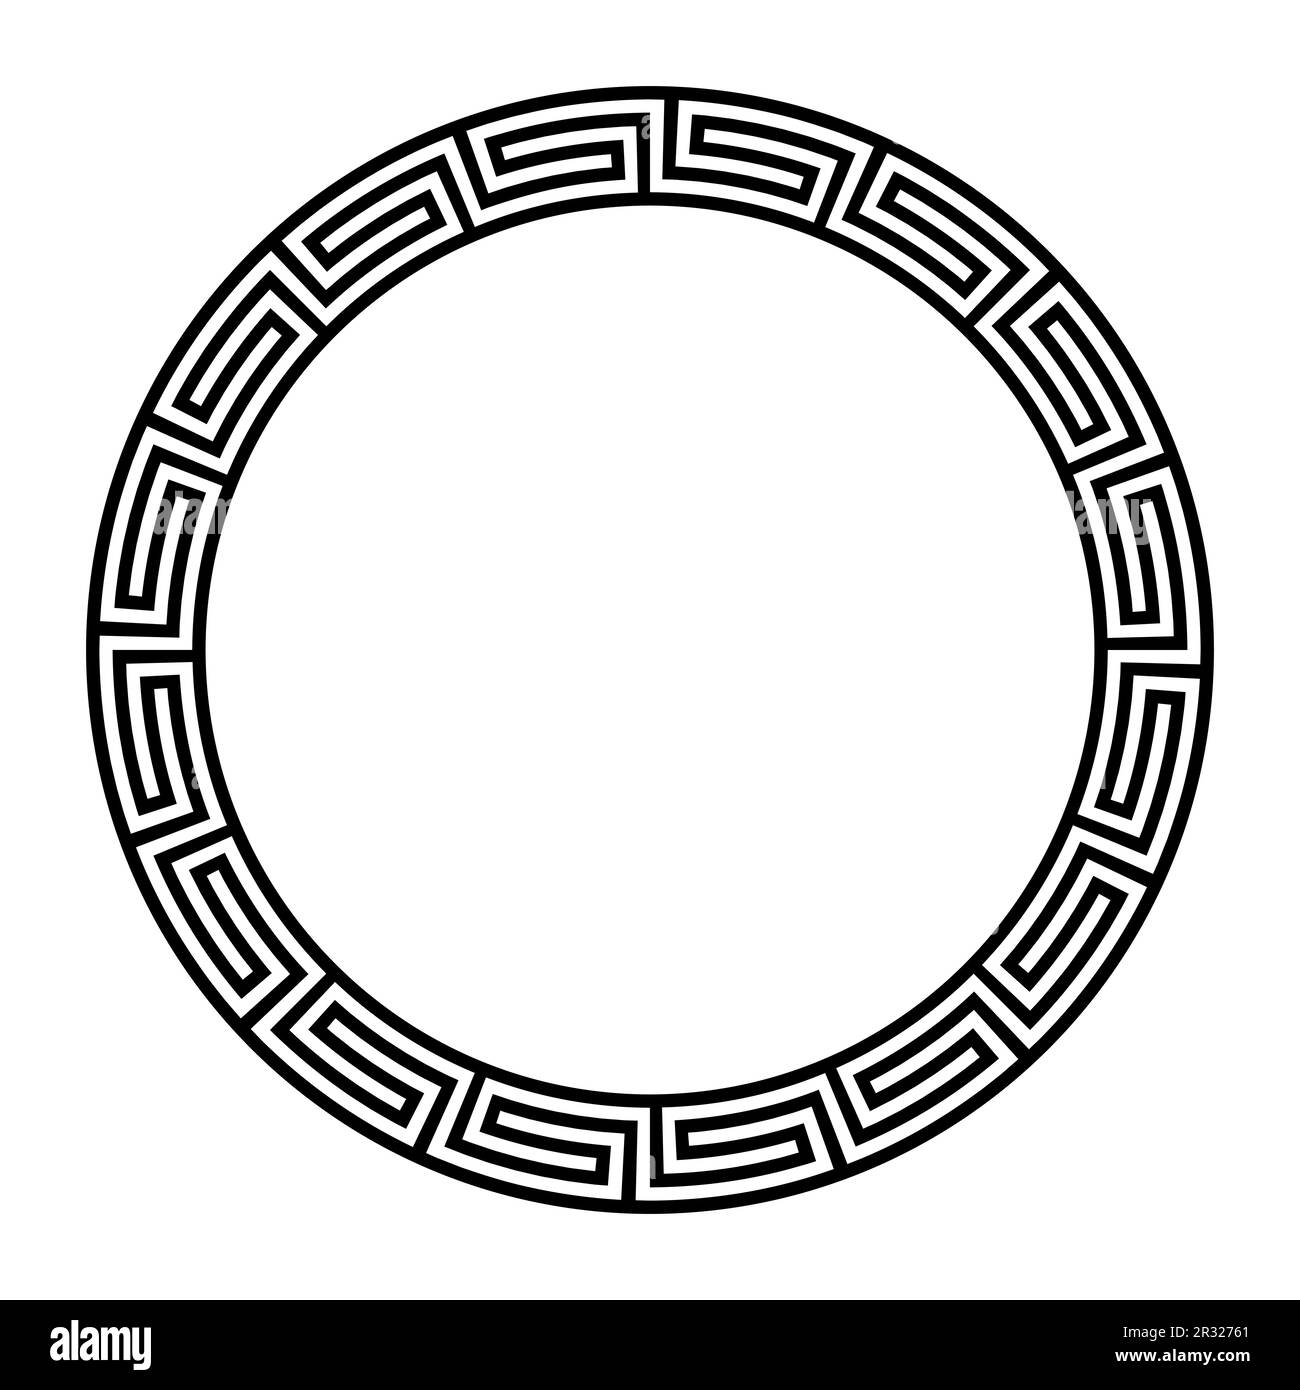 Greek fret ornament, circle frame with seamless meander pattern. A decorative circular border, constructed from continuous lines. Stock Photo